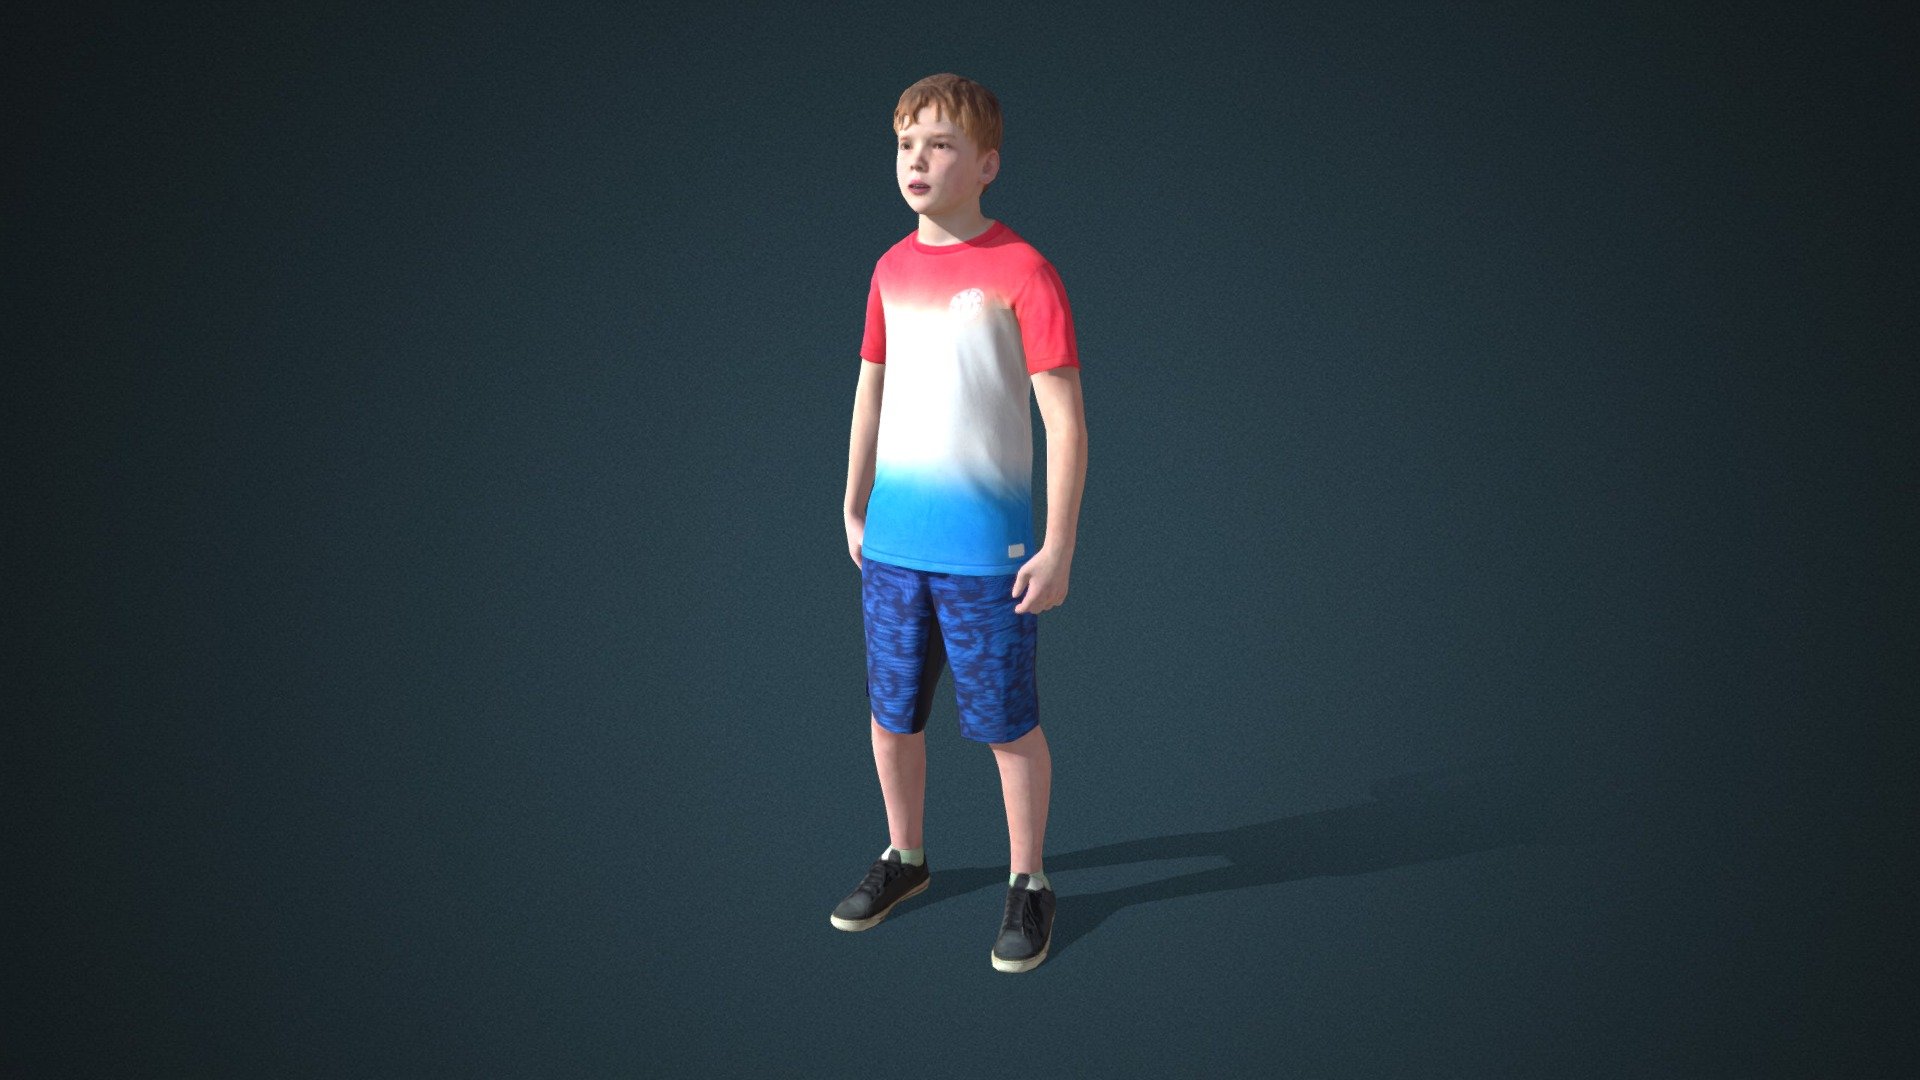 Do you like this model?  Free Download more models, motions and auto rigging tool AccuRIG (Value: $150+) on ActorCore
 

This model includes 2 mocap animations: Modern_M_Idle,Male_walk. Get more free motions

Design for high-performance crowd animation.

Buy full pack and Save 20%+: Teens Vol.2


SPECIFICATIONS

✔ Geometry : 7K~10K Quads, one mesh

✔ Material : One material with changeable colors.

✔ Texture Resolution : 4K

✔ Shader : PBR, Diffuse, Normal, Roughness, Metallic, Opacity

✔ Rigged : Facial and Body (shoulders, fingers, toes, eyeballs, jaw)

✔ Blendshape : 122 for facial expressions and lipsync

✔ Compatible with iClone AccuLips, Facial ExPlus, and traditional lip-sync.


About Reallusion ActorCore

ActorCore offers the highest quality 3D asset libraries for mocap motions and animated 3D humans for crowd rendering 3d model